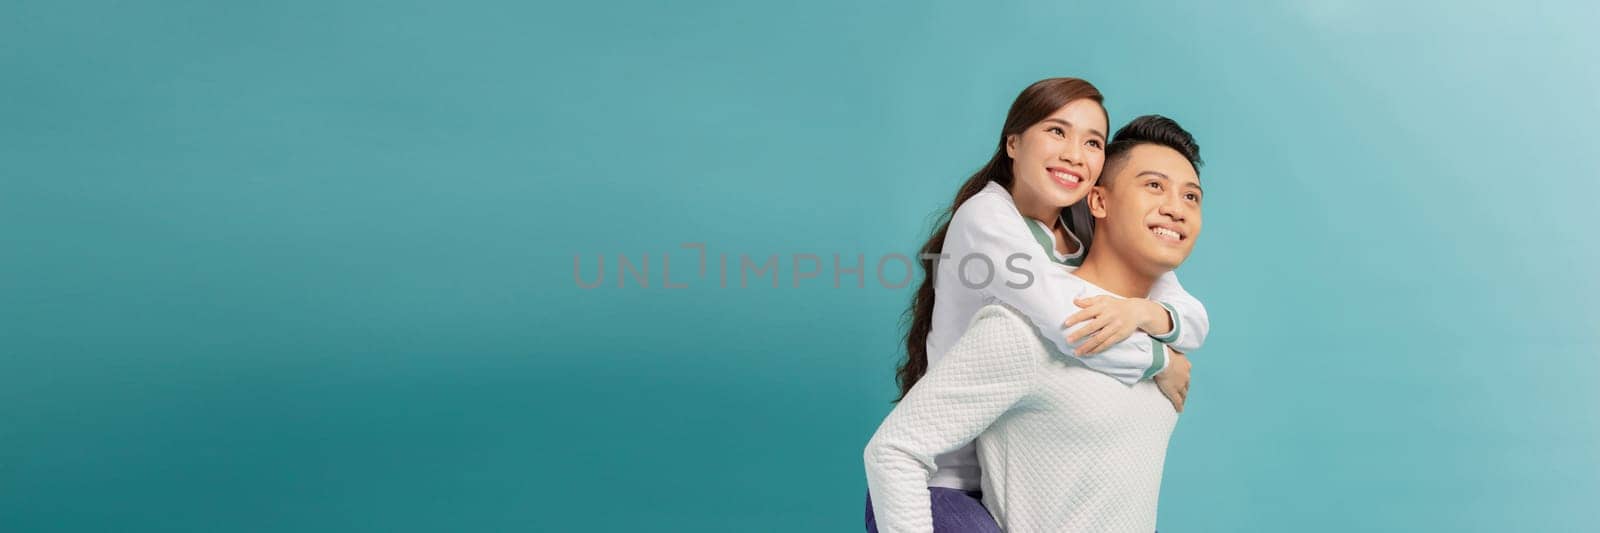 Cute couple embracing and looking the camera on light blue background by makidotvn